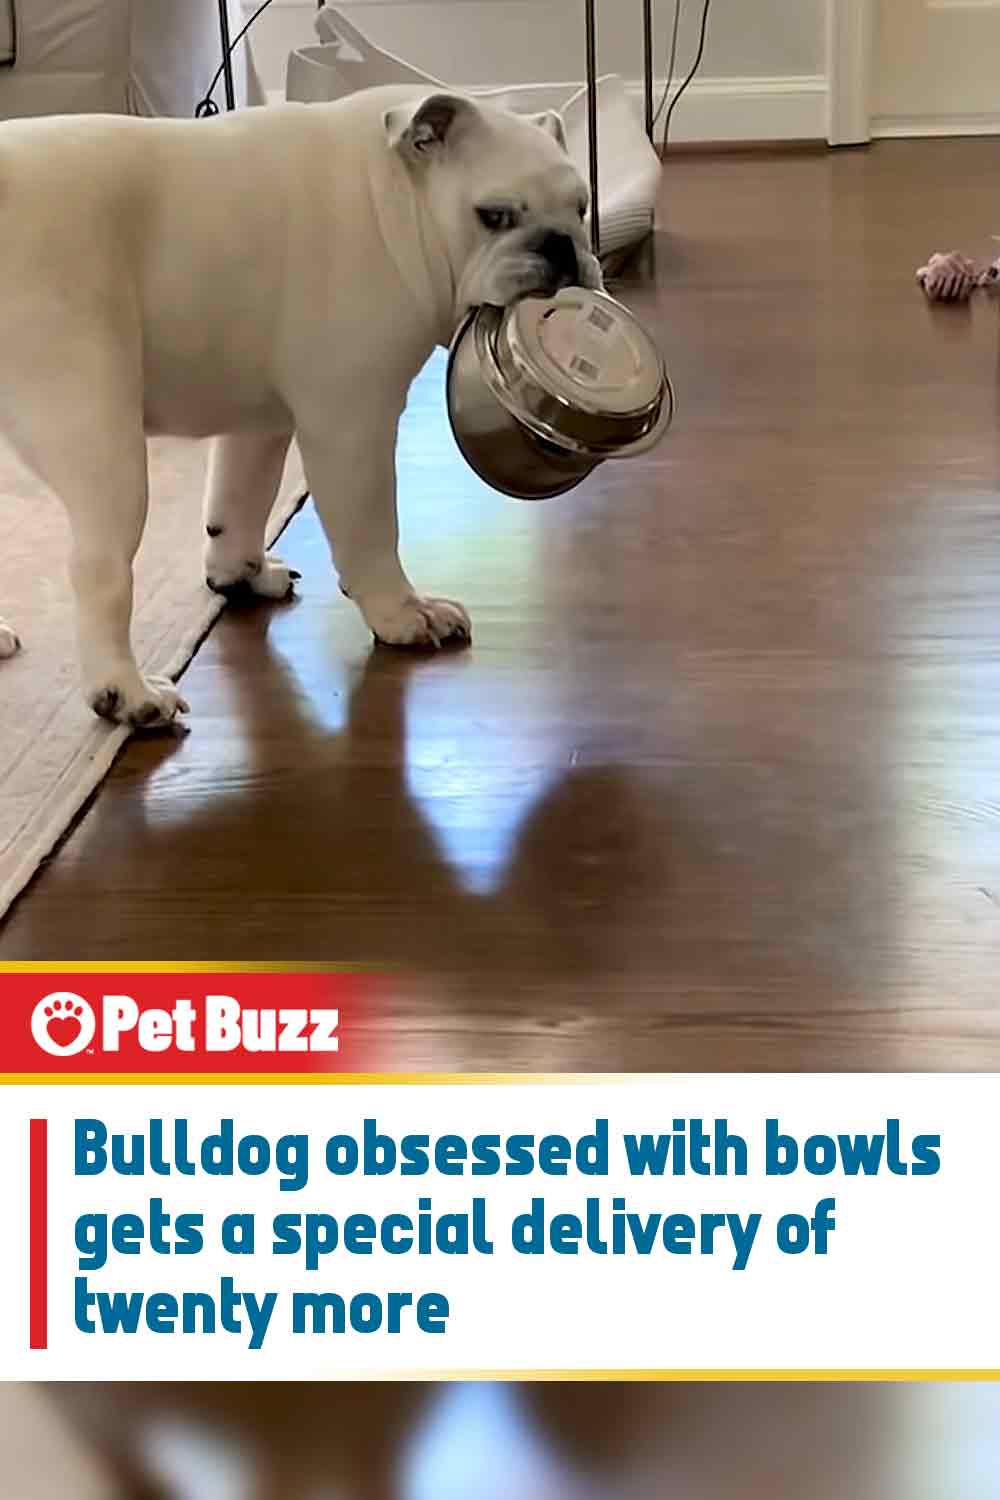 Bulldog obsessed with bowls gets a special delivery of twenty more